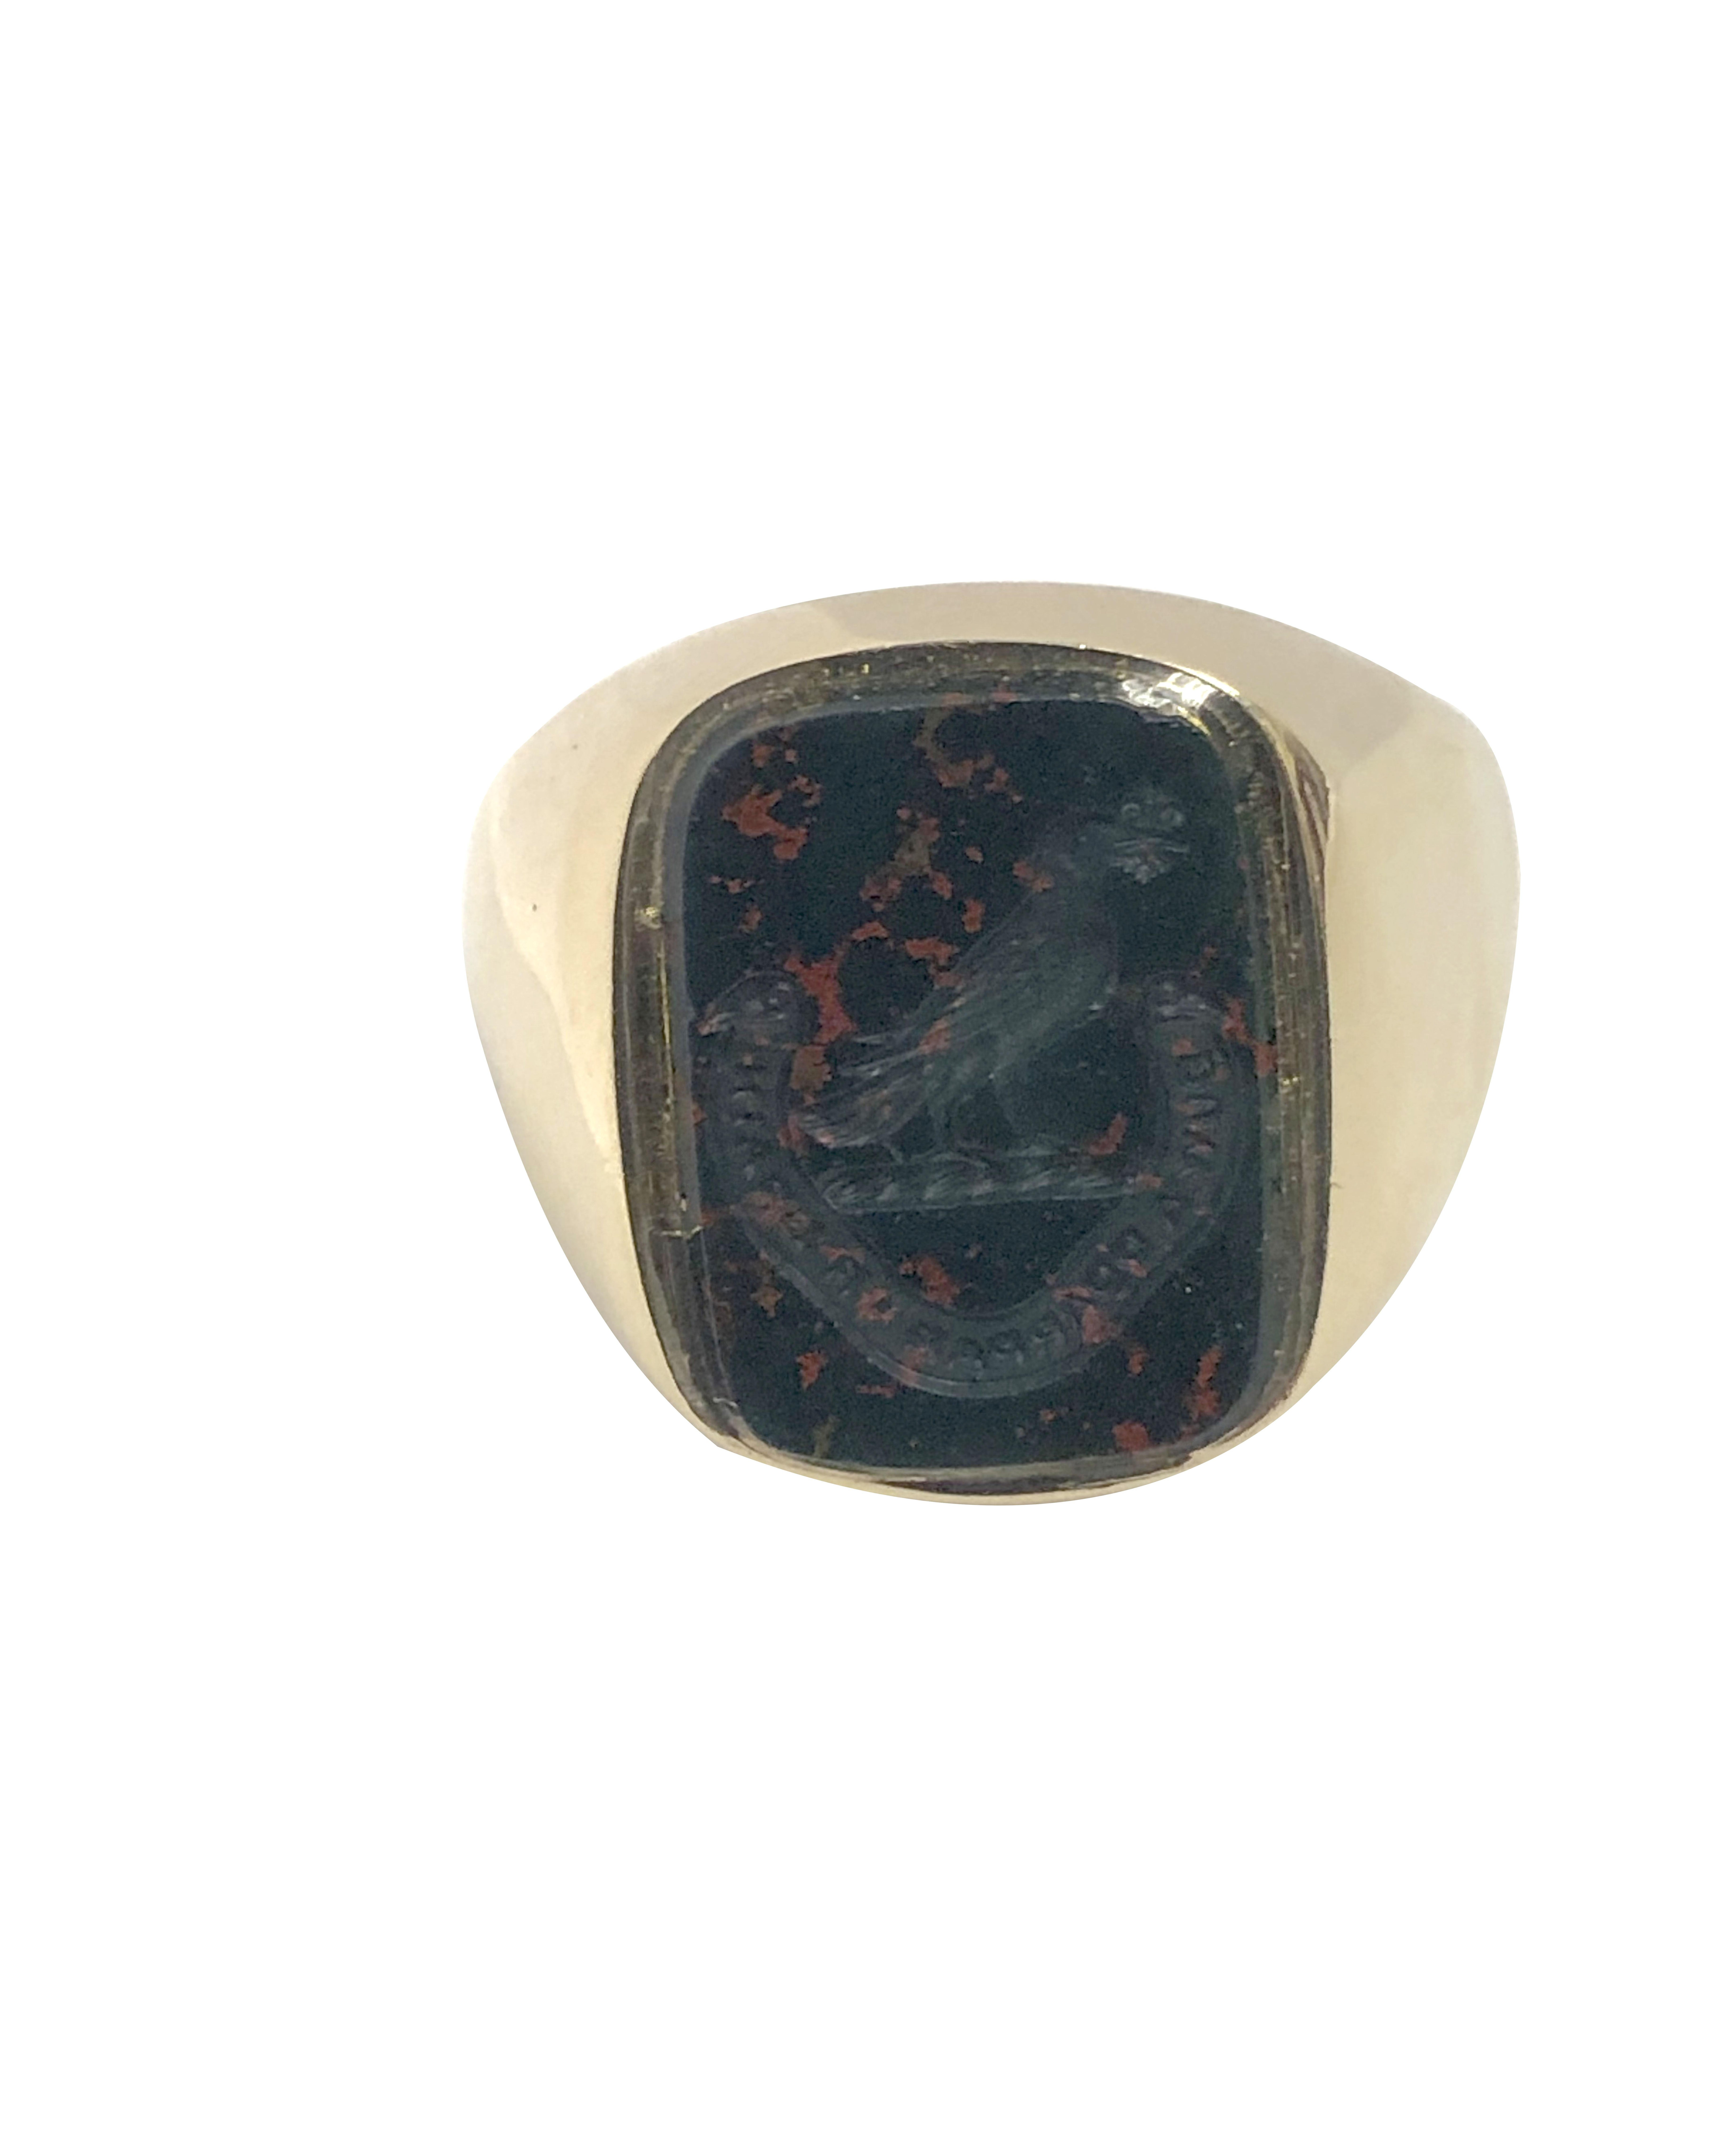 Circa 1900 9K Yellow Gold Signet Ring, Having a Bloodstone measuring 5/8 X 1/2 inch that has a deep carved Signet of a Bird and a half wreath of Latin Wording. Finger size 9 1/2.